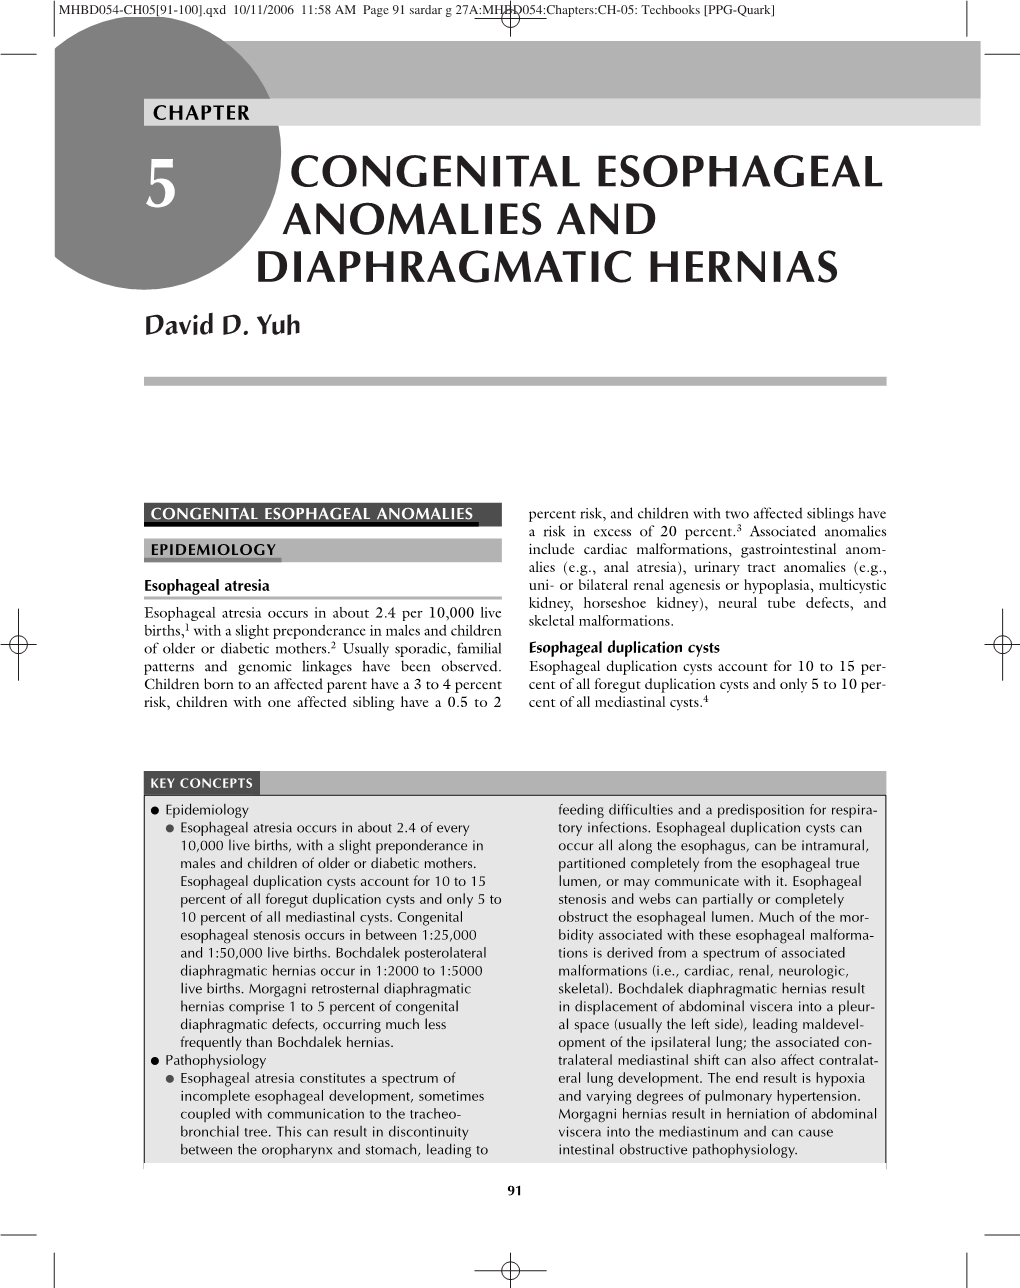 Congenital Esophageal Anomalies and Diaphragmatic Hernias 93